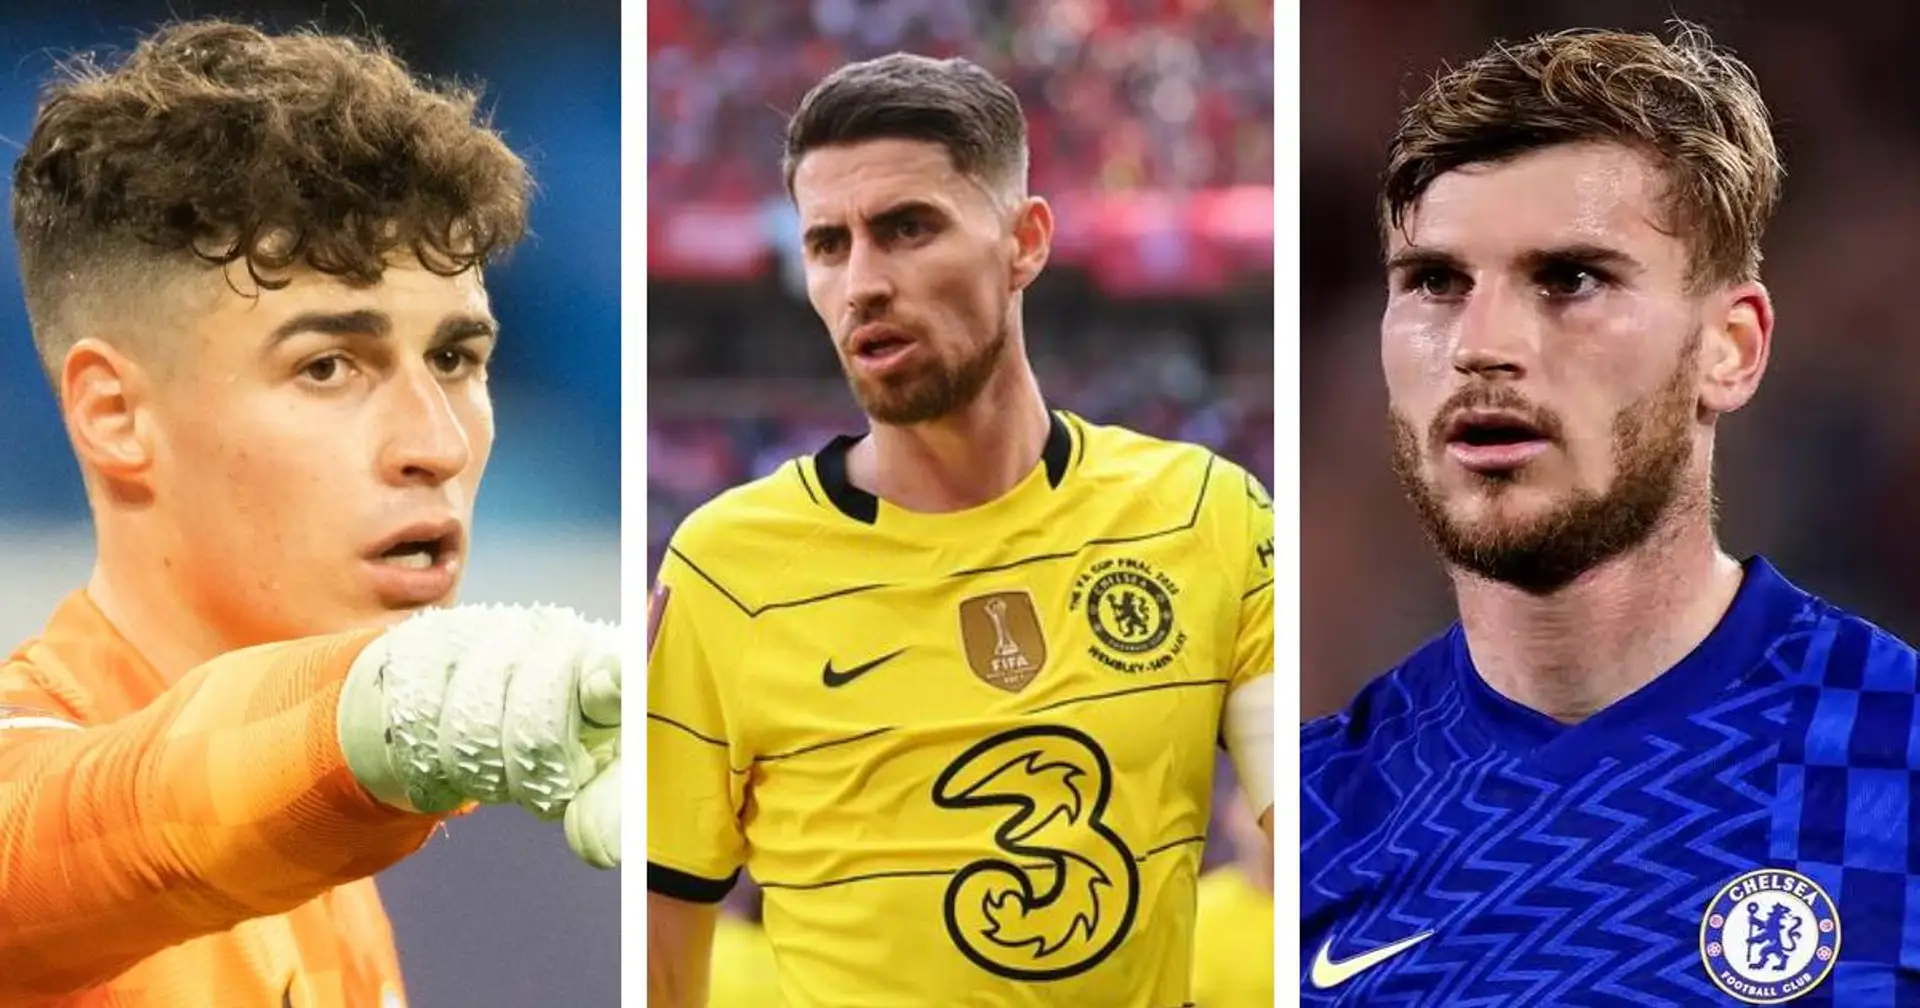 Chelsea could reportedly offload seven players this summer, collecting £170 million through sales 